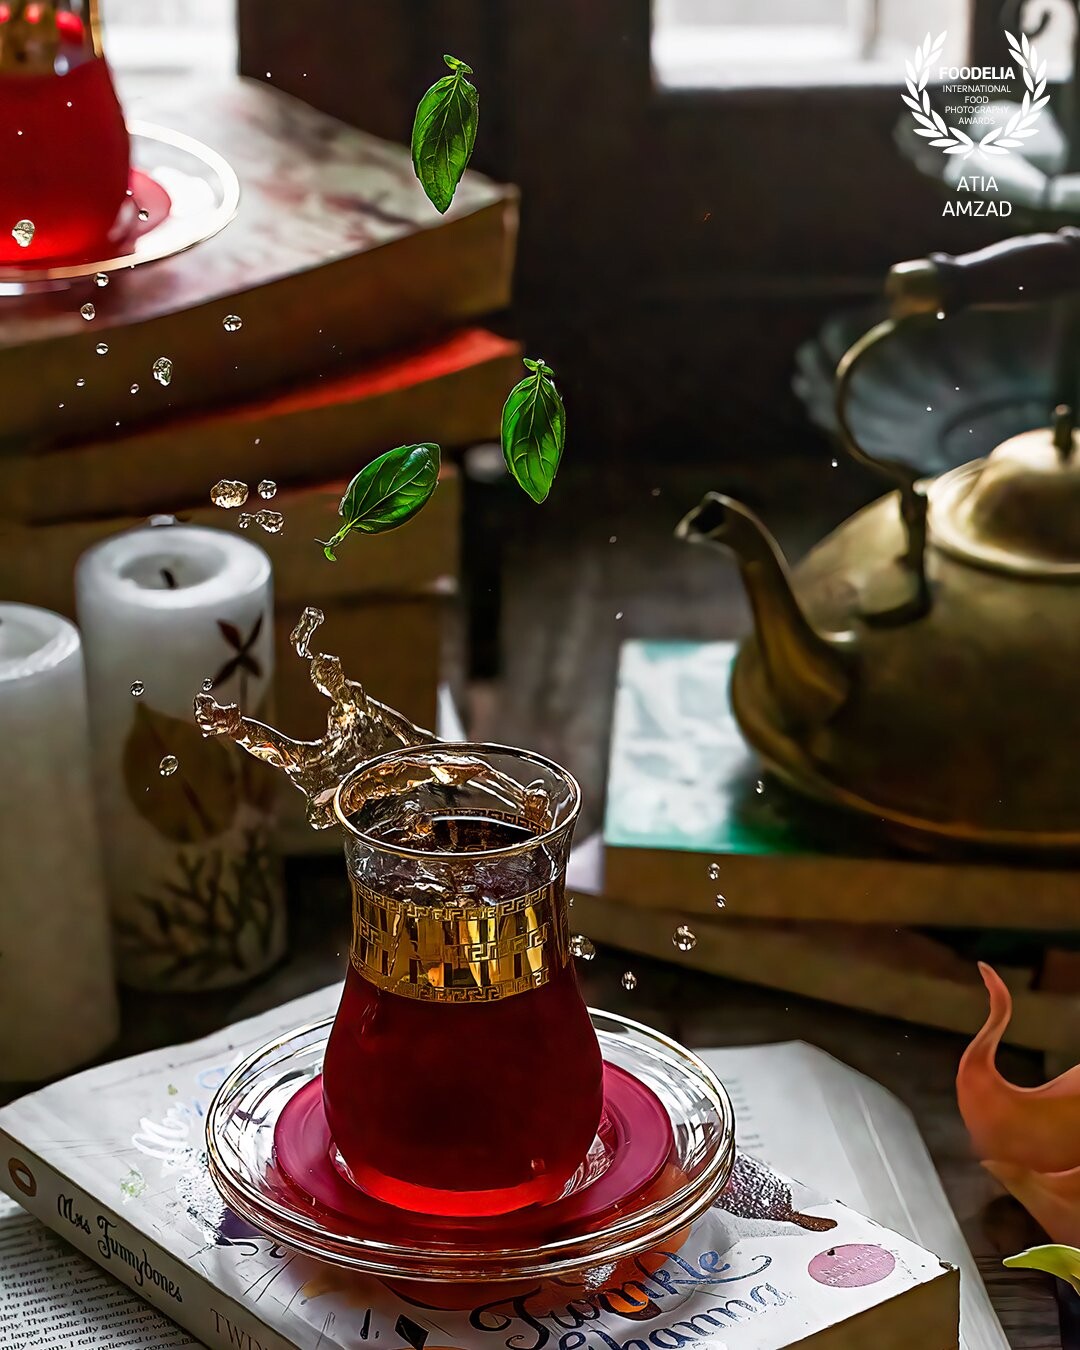 Being a tea addict, I always love to capture tea images, so in a fine winter morning I decided to have a cup of basil tea,  but before that I wanted to capture a picture of it. And here it is,  beautiful splash and levitation with the tea!!